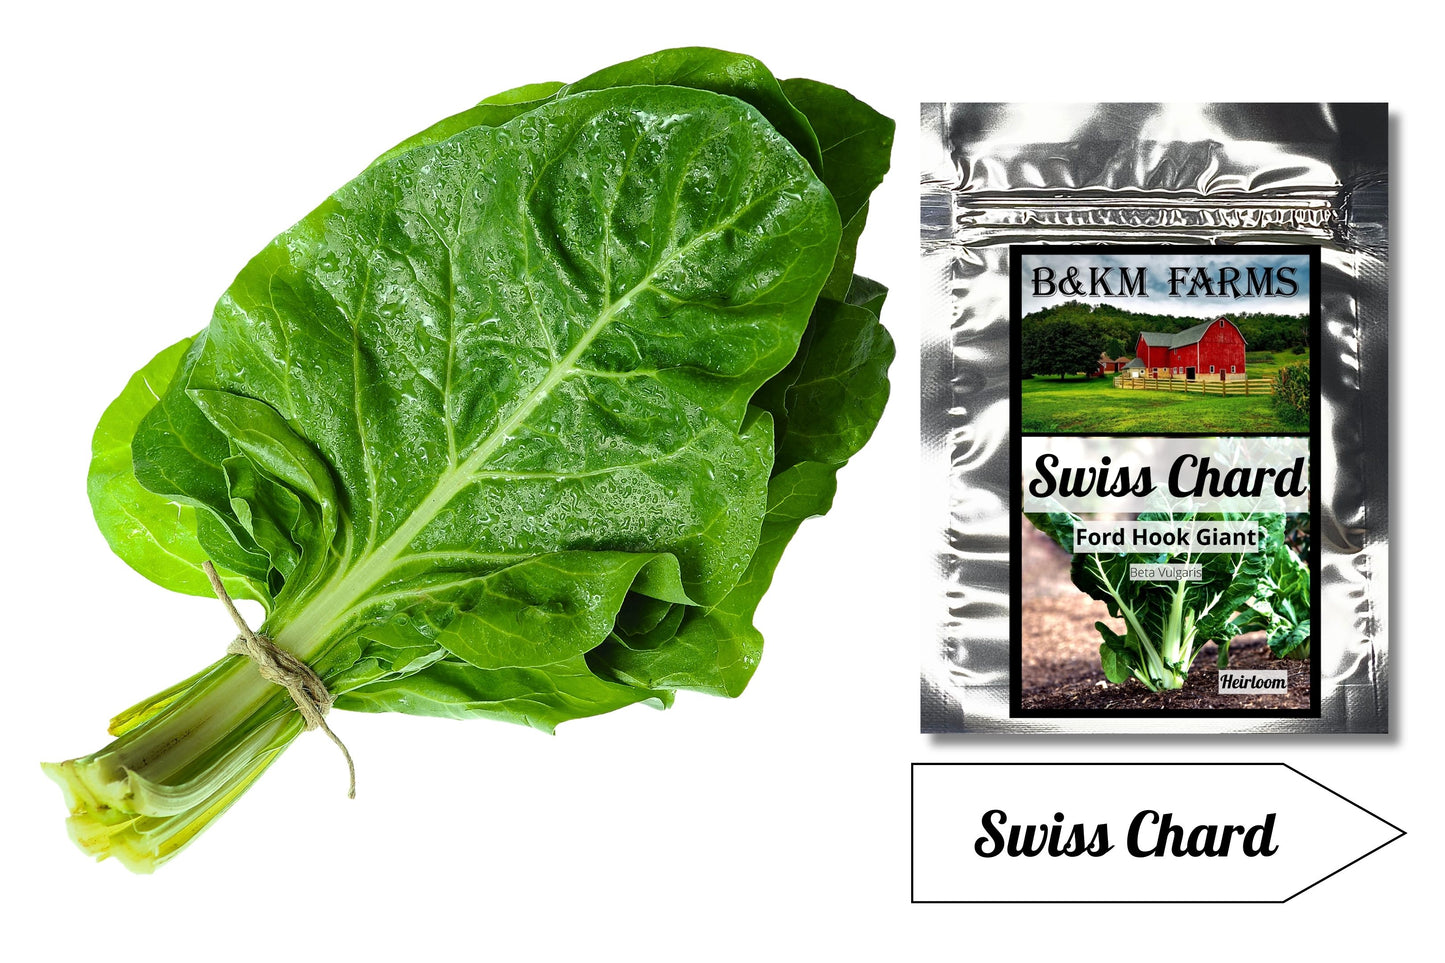 Giant Fordhook Swiss Chard: Emerald Stalks with Silver Sheen, Ready to Elevate Your Garden